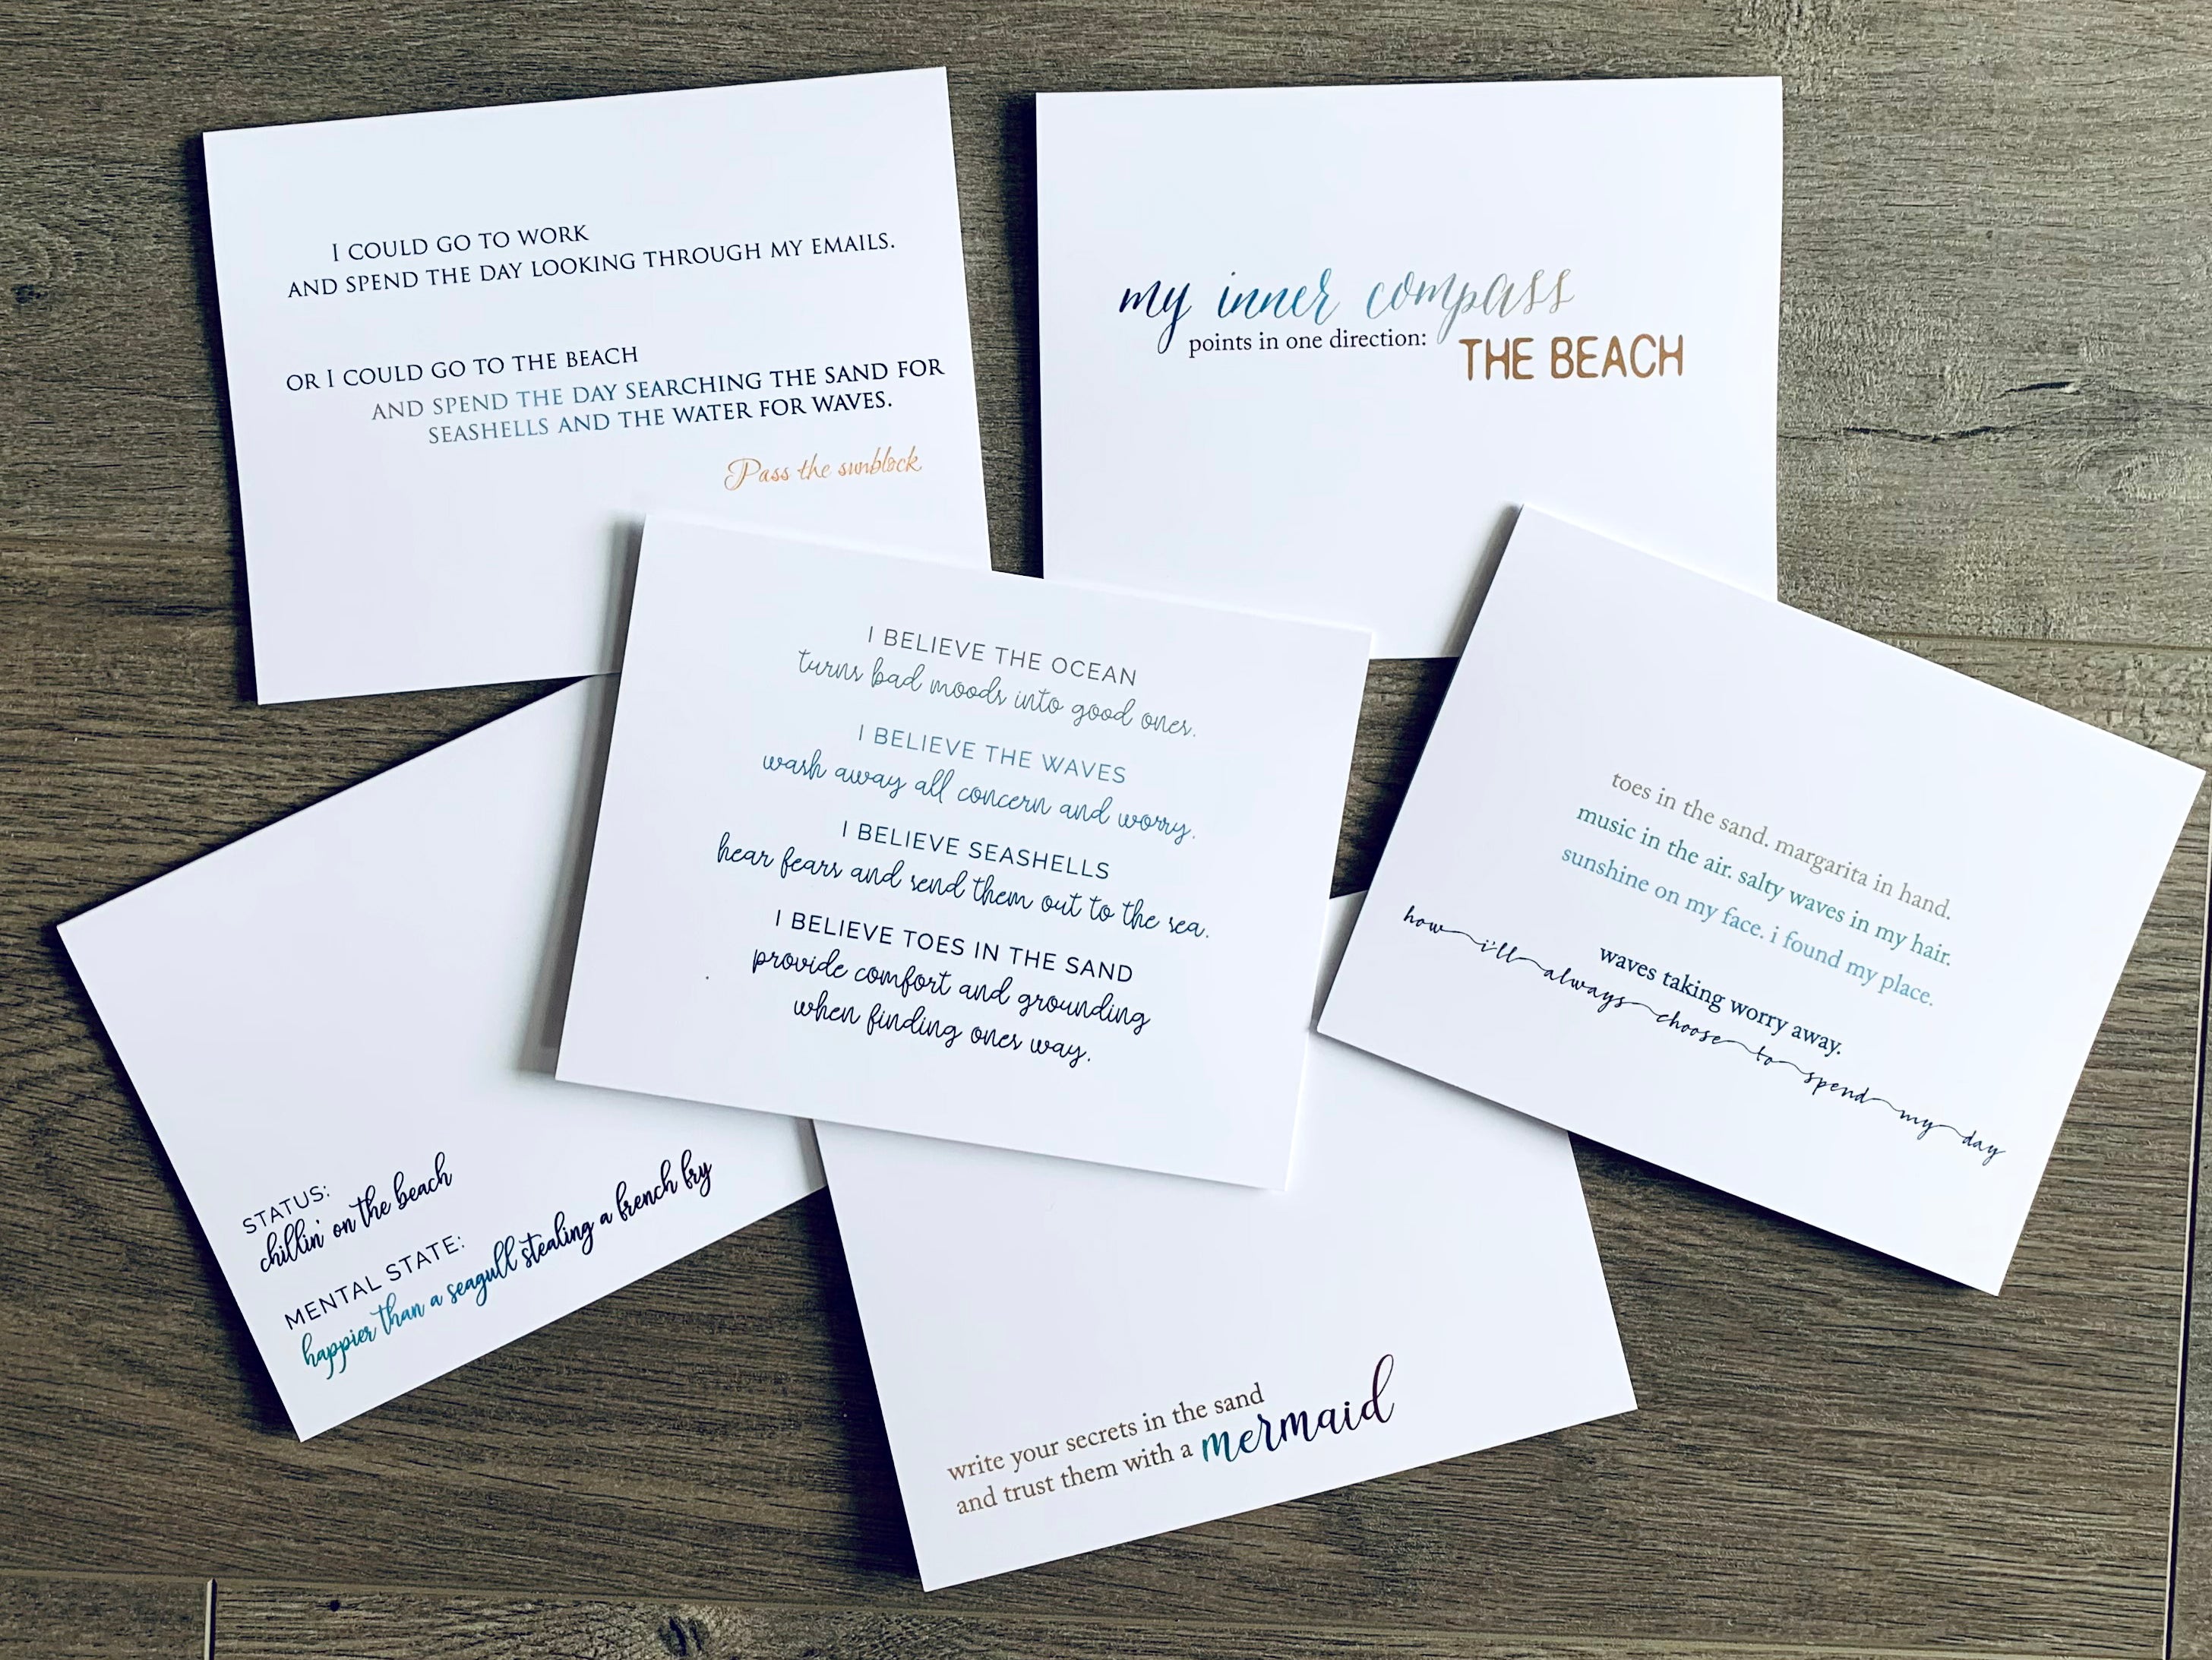 Six white notecards lie on a wooden background. Each card hosts a comical saying about enjoying life at the beach.